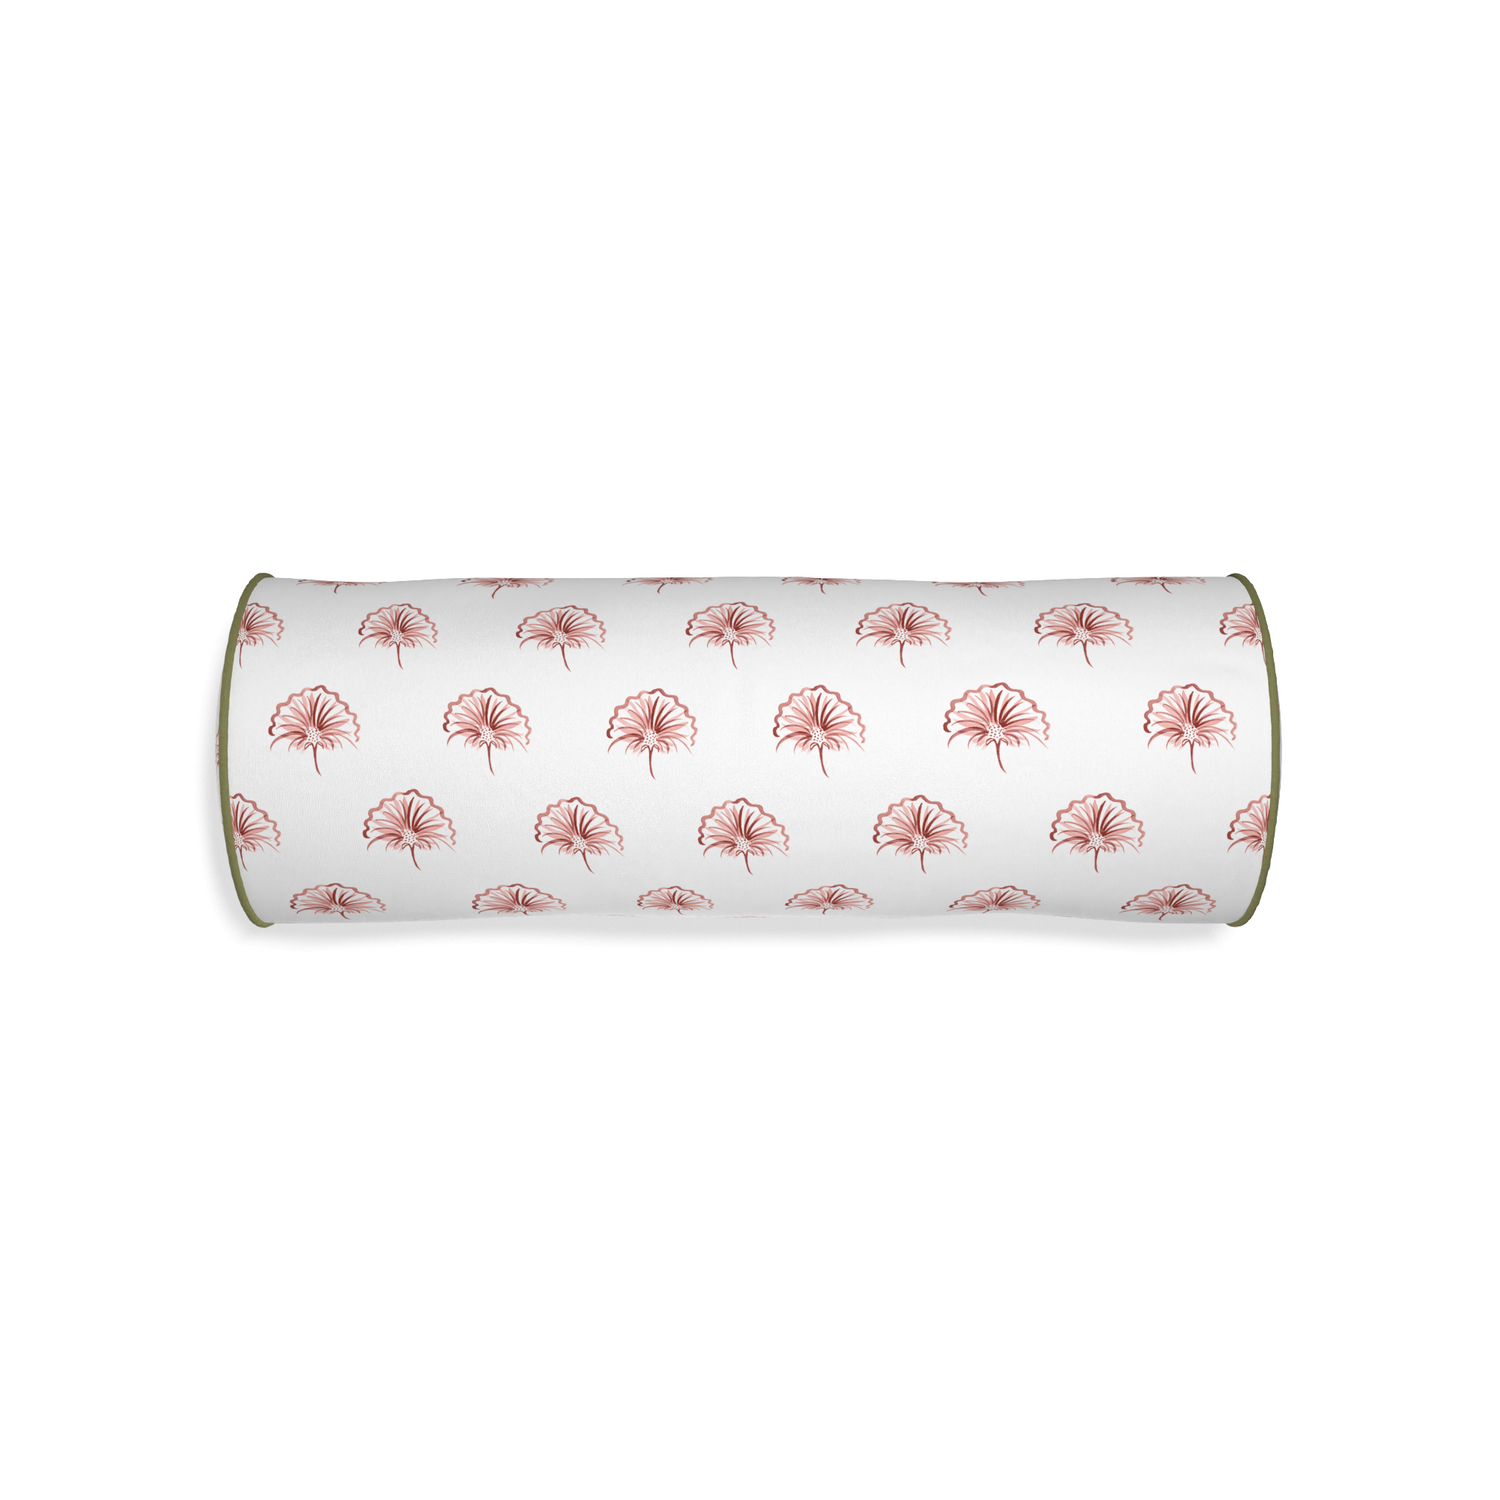 Bolster penelope rose custom floral pinkpillow with moss piping on white background